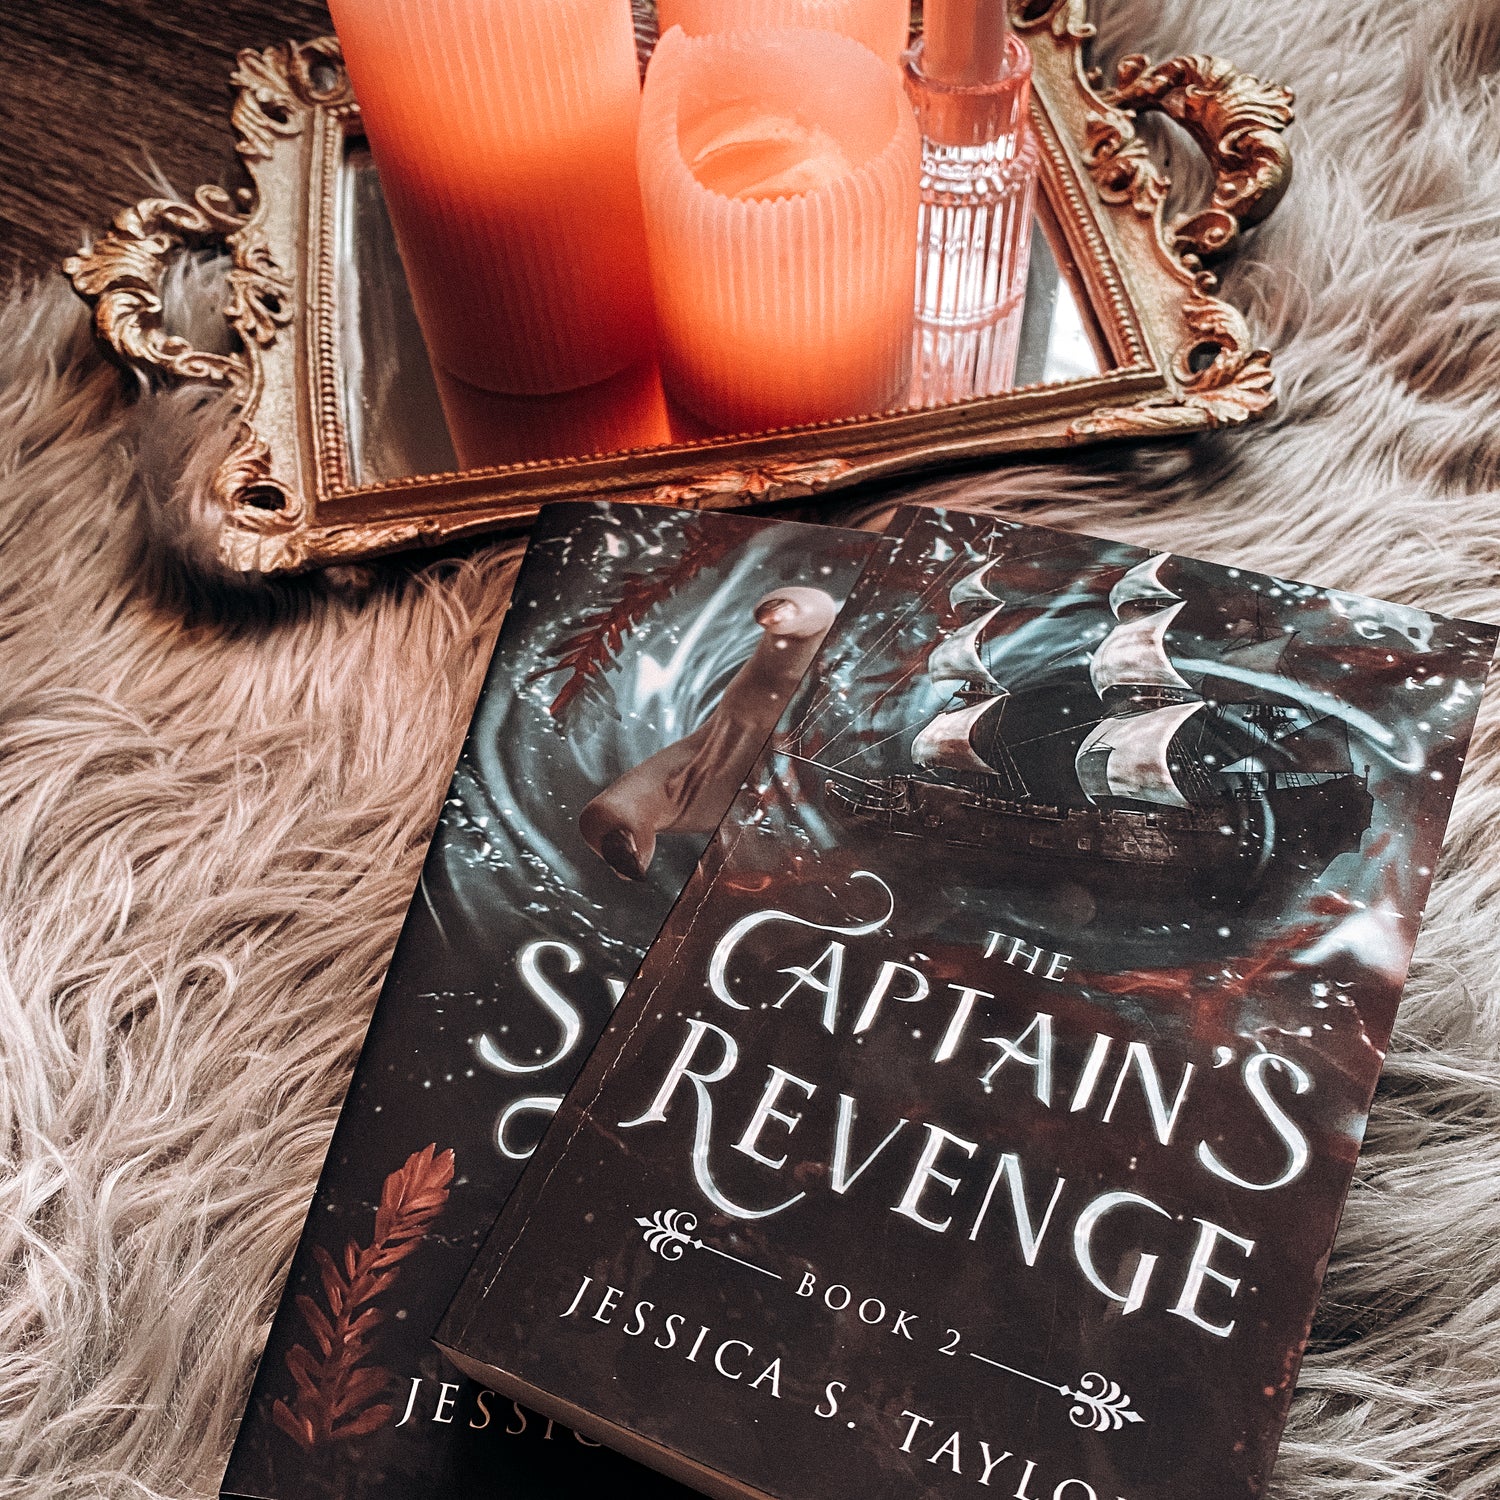 A paperback of The Captain's Revenge, featuring a ship in a teal ocean with red blood spreading through the water, sits atop a hardback of The Syren's Mutiny. In the background, a gray fur rug. In the top border area, a mirrored tray with pink candles.